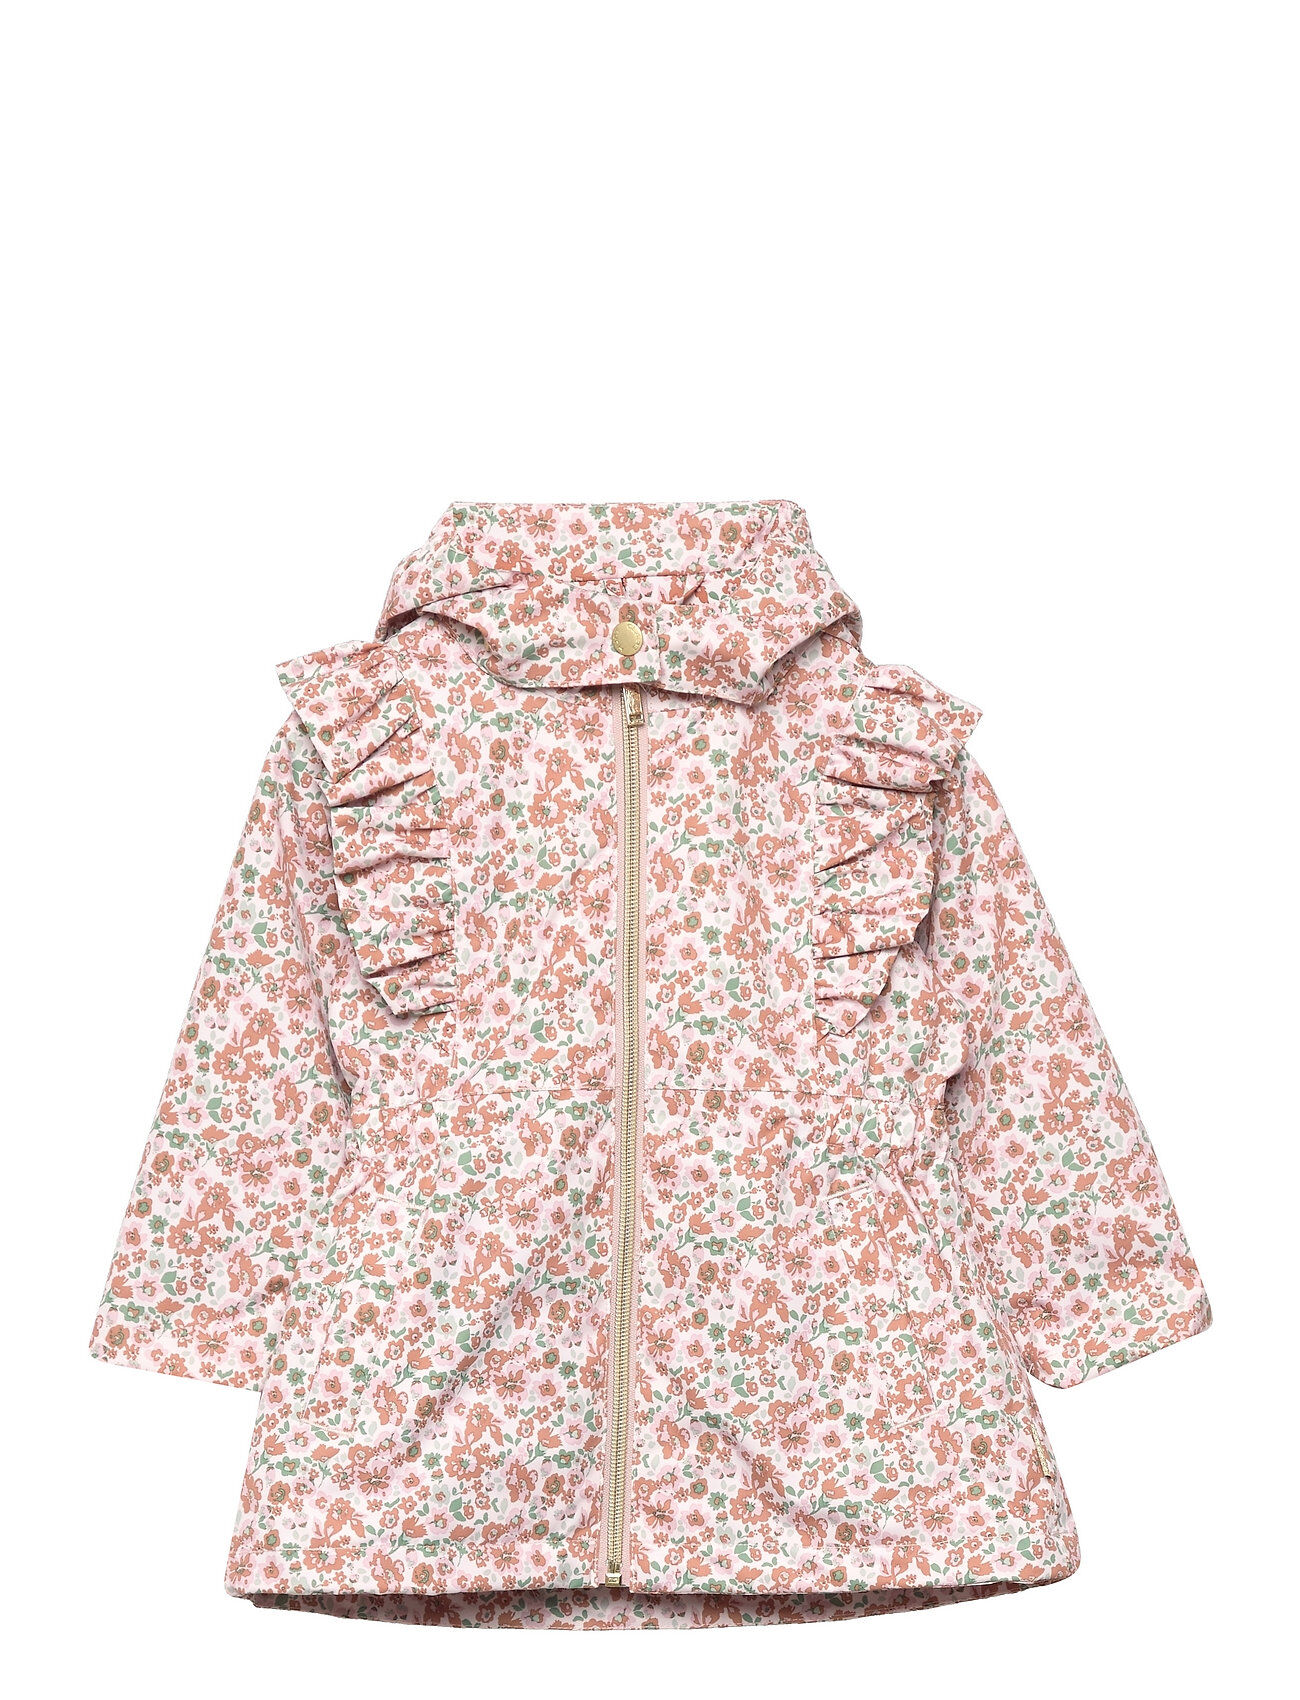 Hust & Claire Ofelise - Jacket Outerwear Shell Clothing Shell Jacket Multi/mønstret Hust & Claire